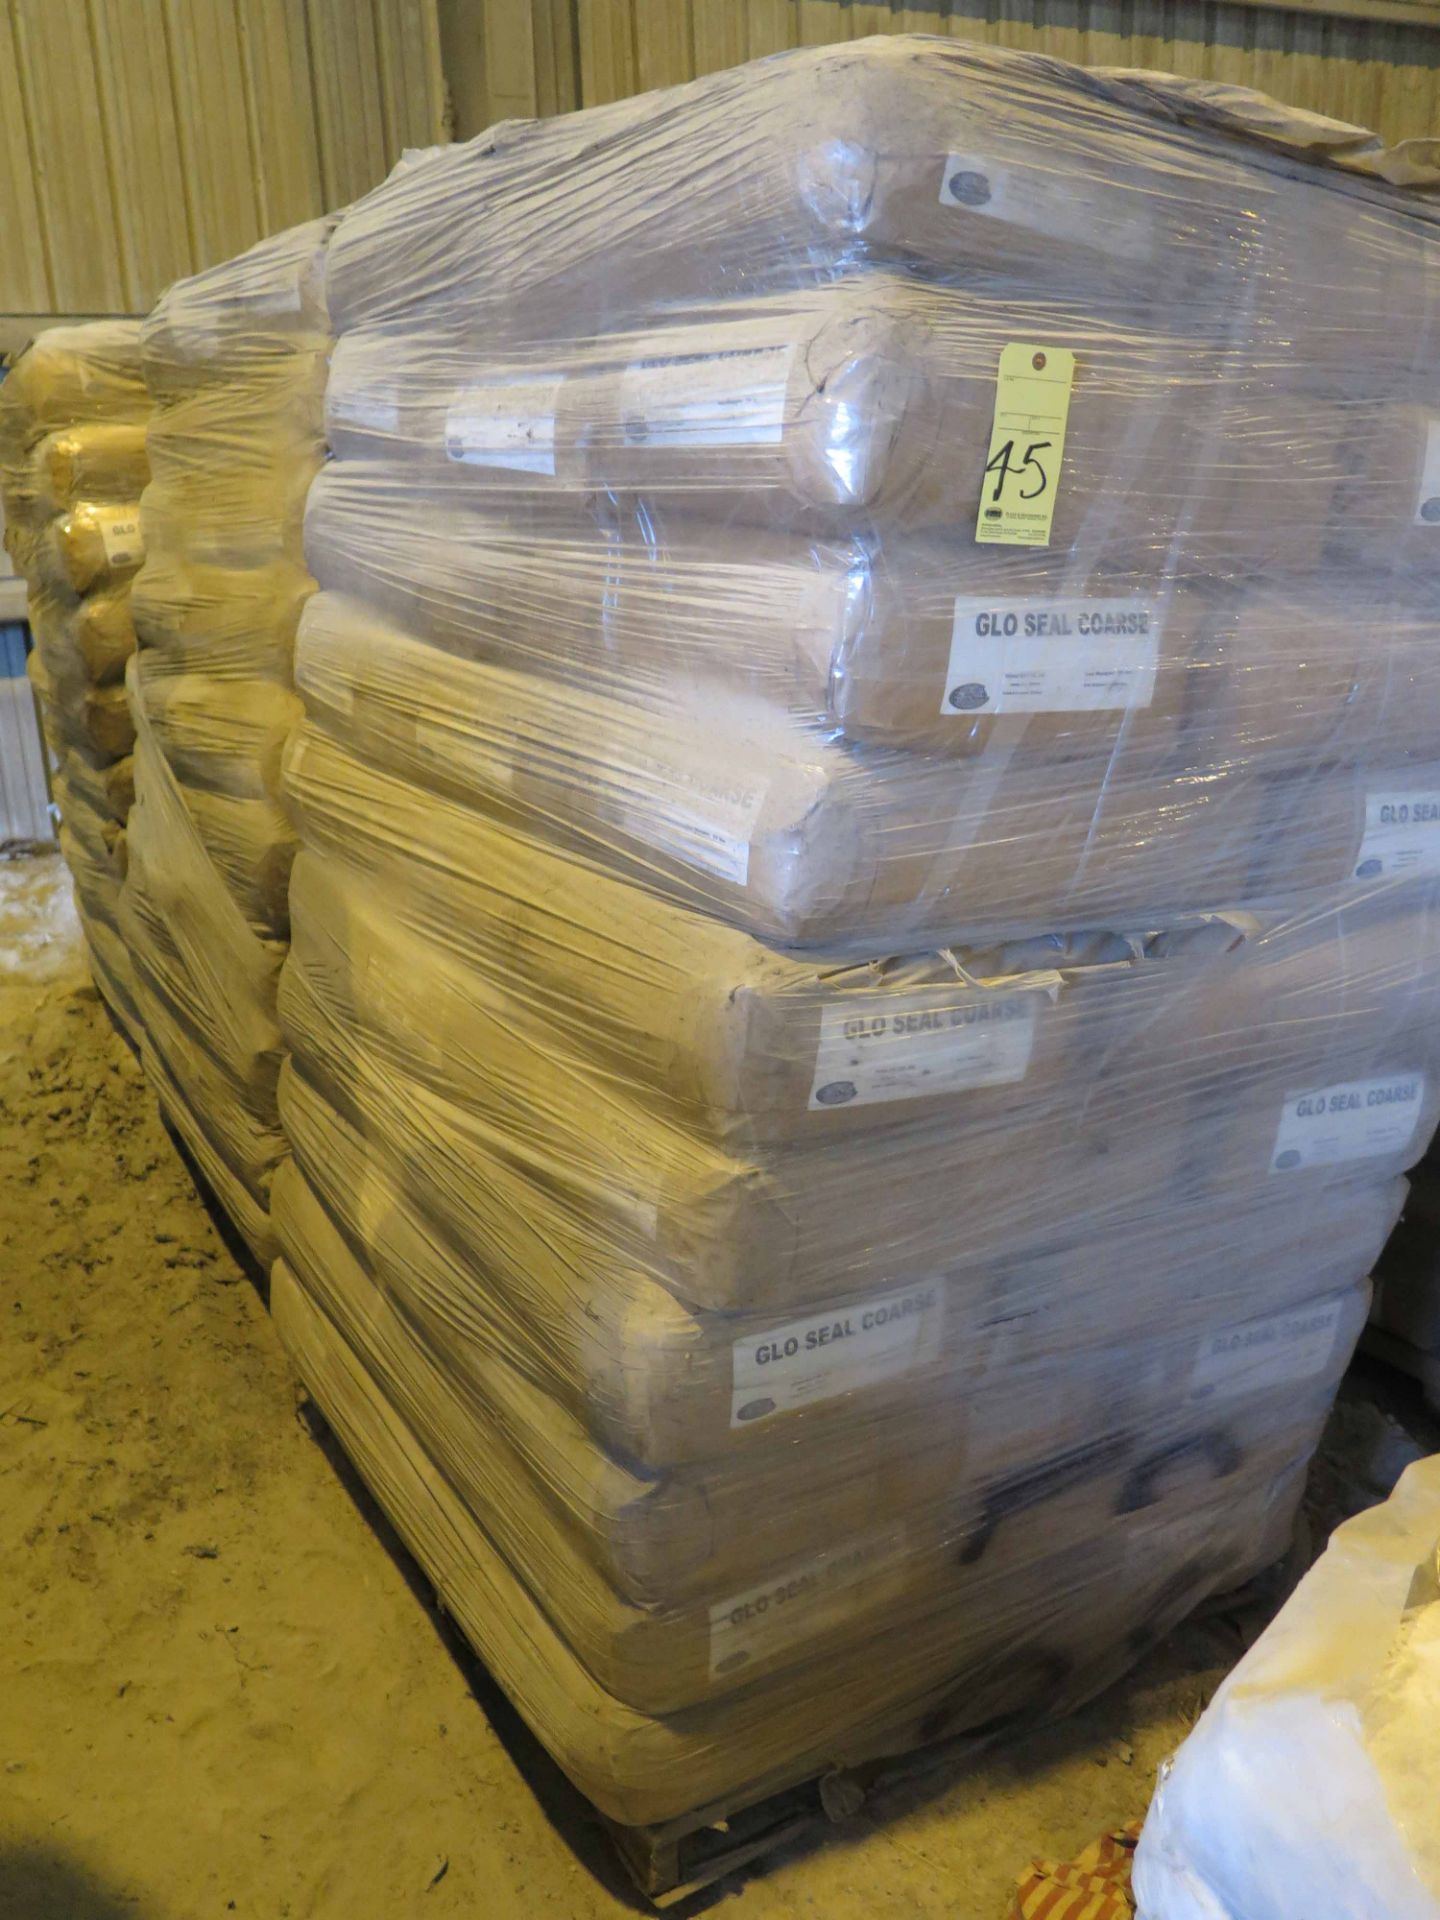 LOT OF GLO SEAL COARSE (approx. 488 bags) (Location #1: 374 Walter White Road, Trinity, TX 75862) - Image 2 of 2